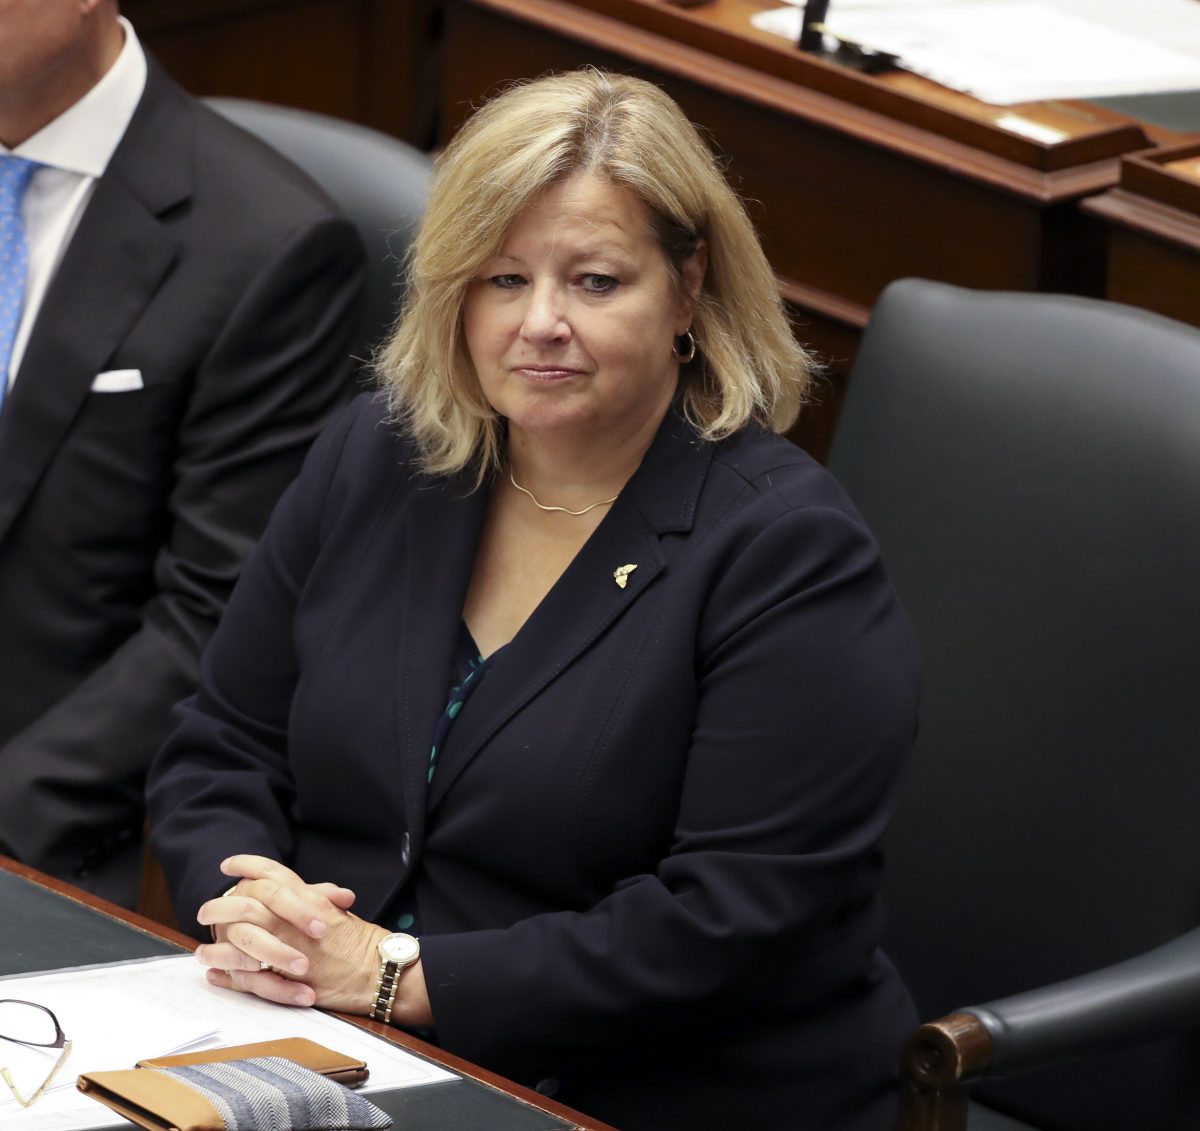 NDP and labour call government's $1.6B 'attrition protection allocation' a cut by another name